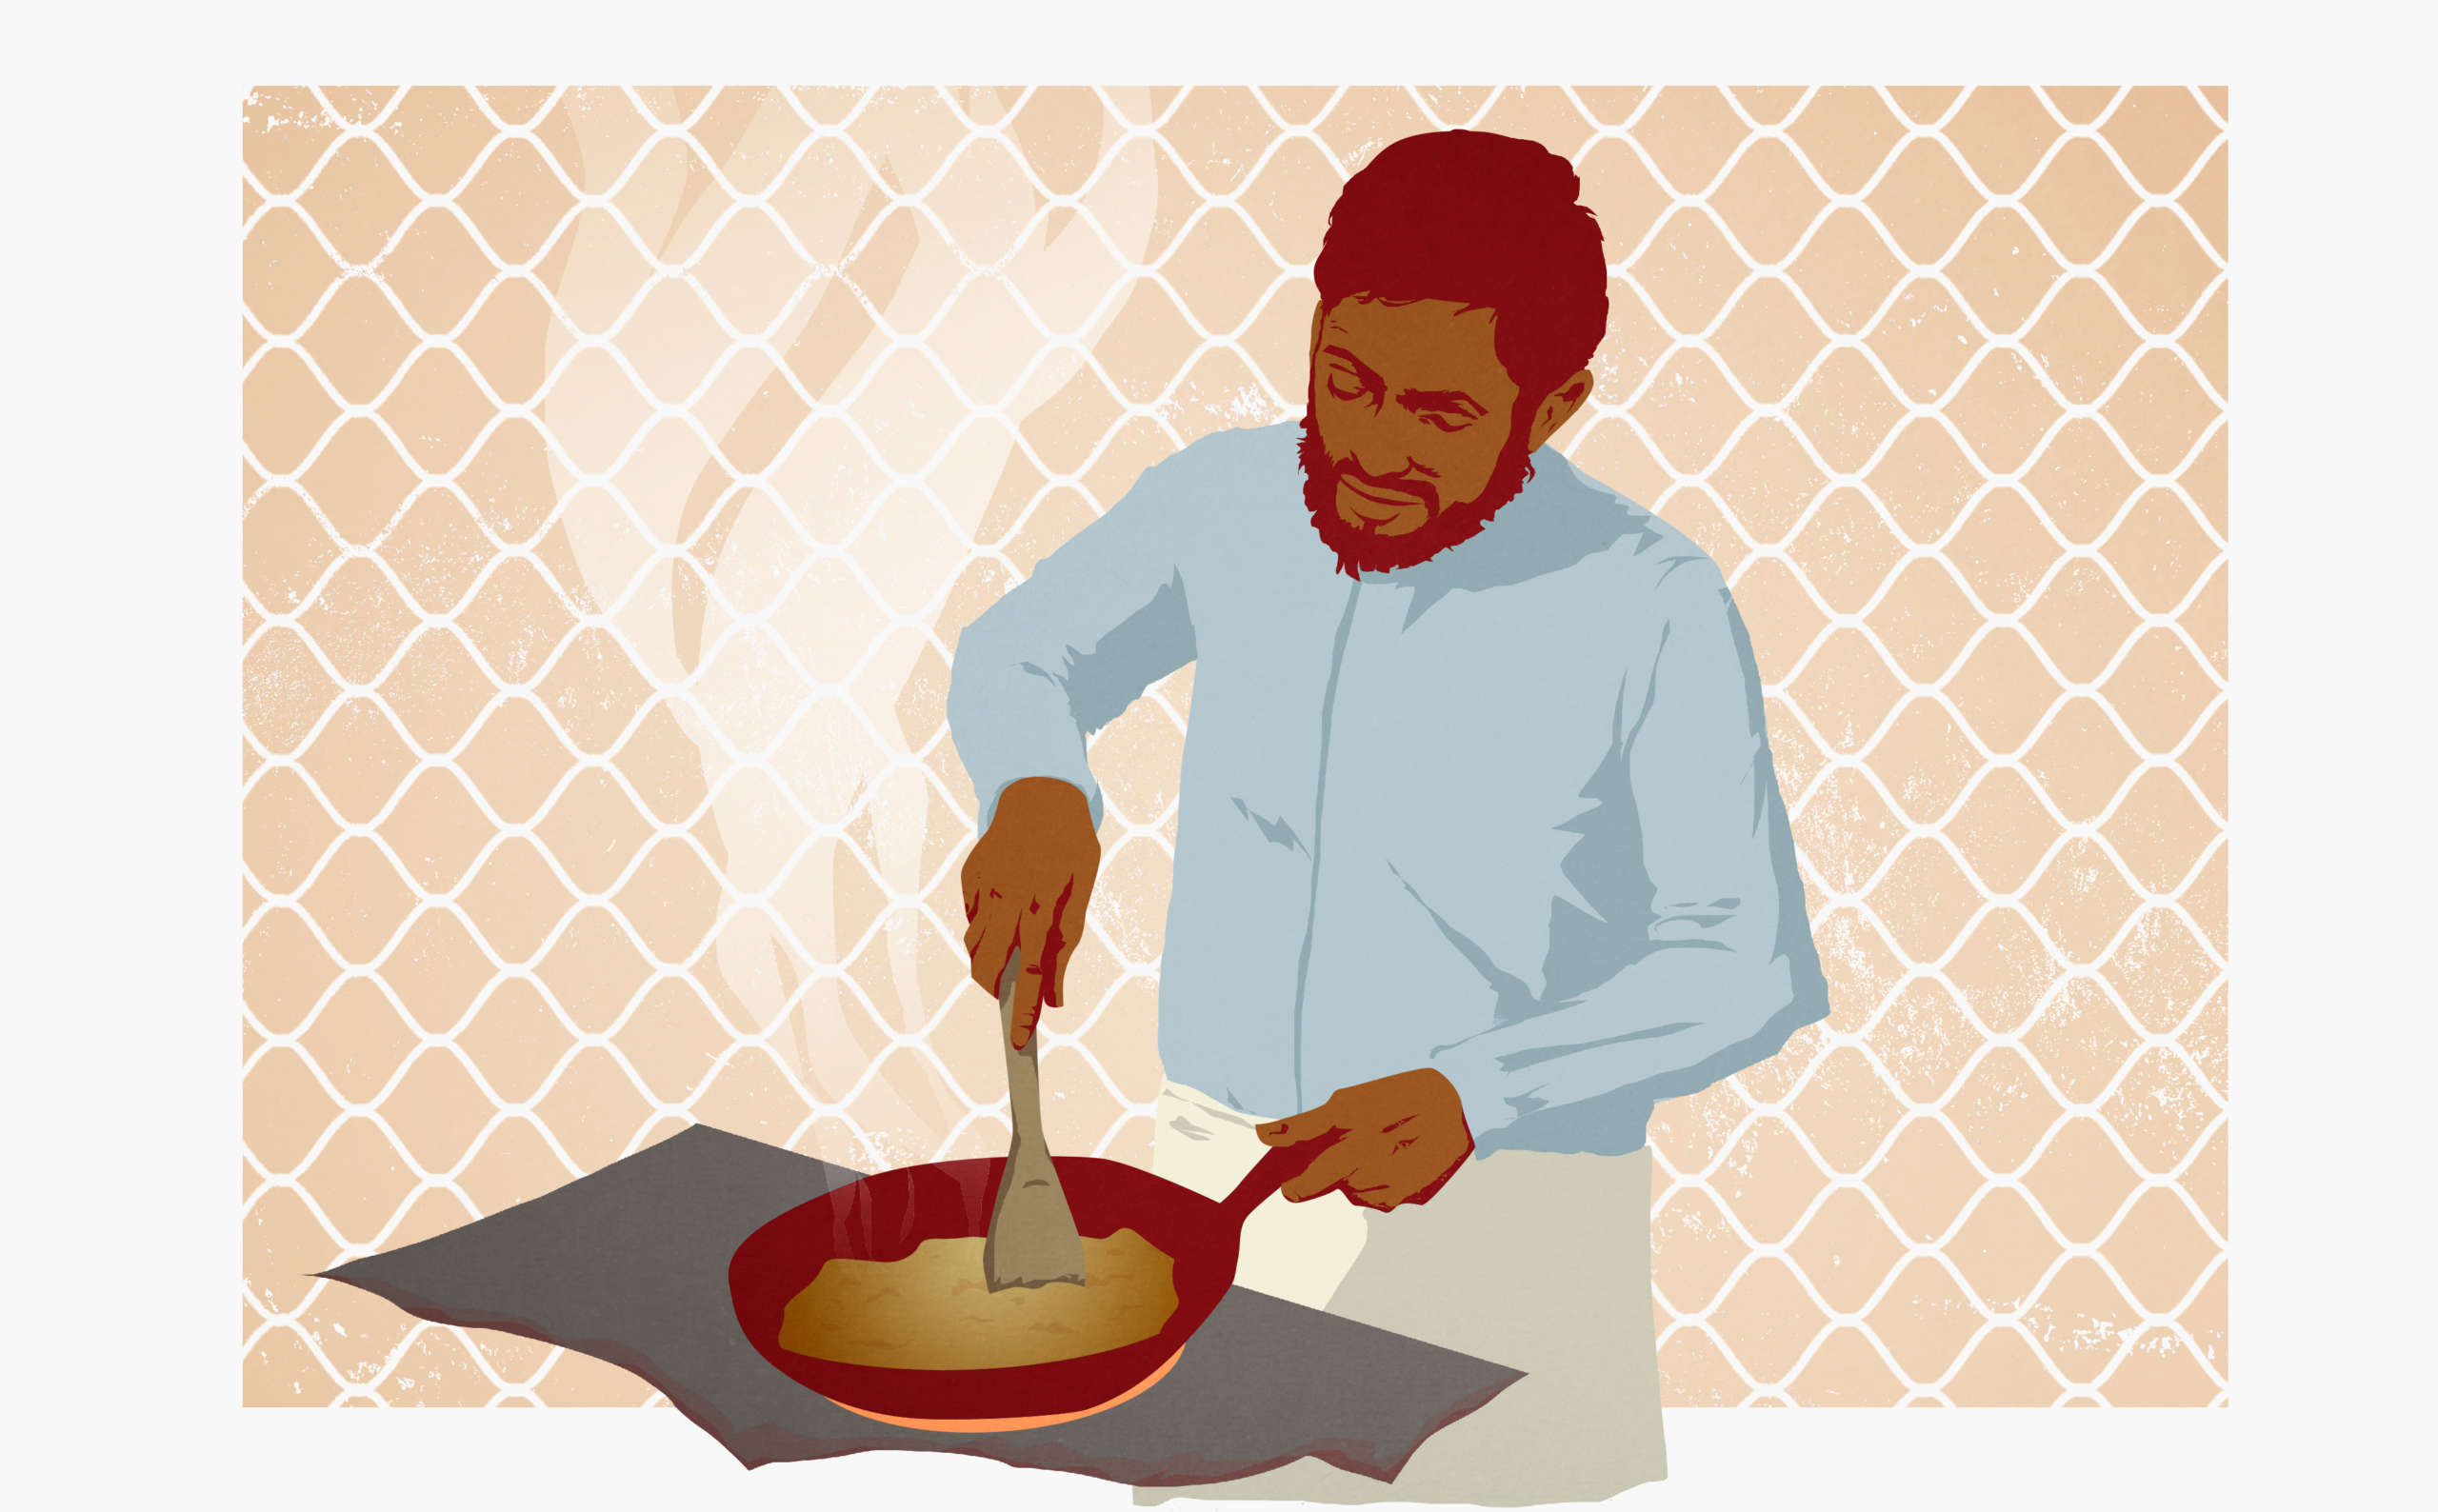 https://truthout.org/app/uploads/2021/02/2021_0209-guantanamo-cooking-scaled.jpg